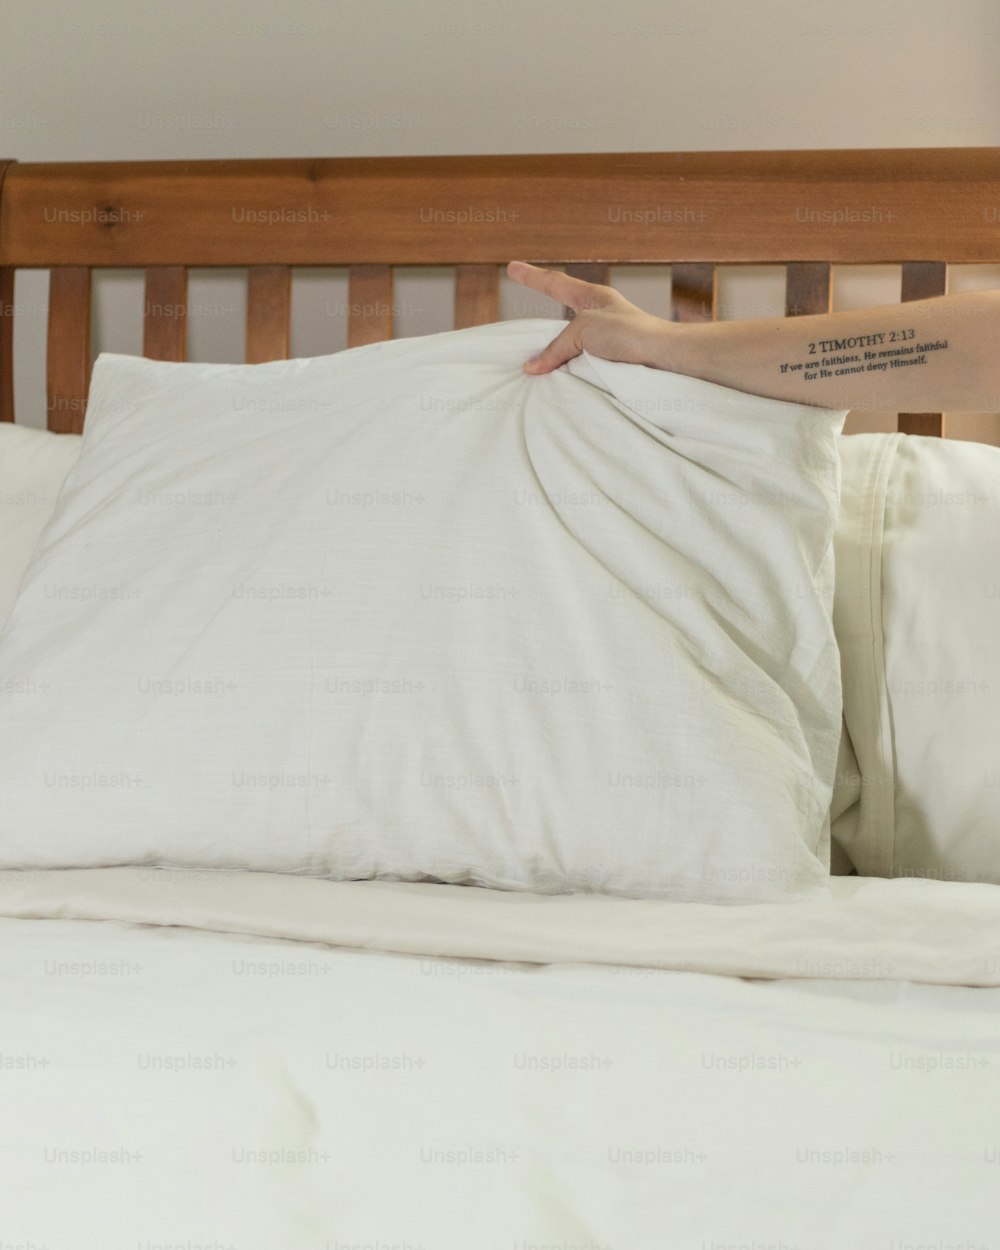 a person reaching for a pillow on a bed